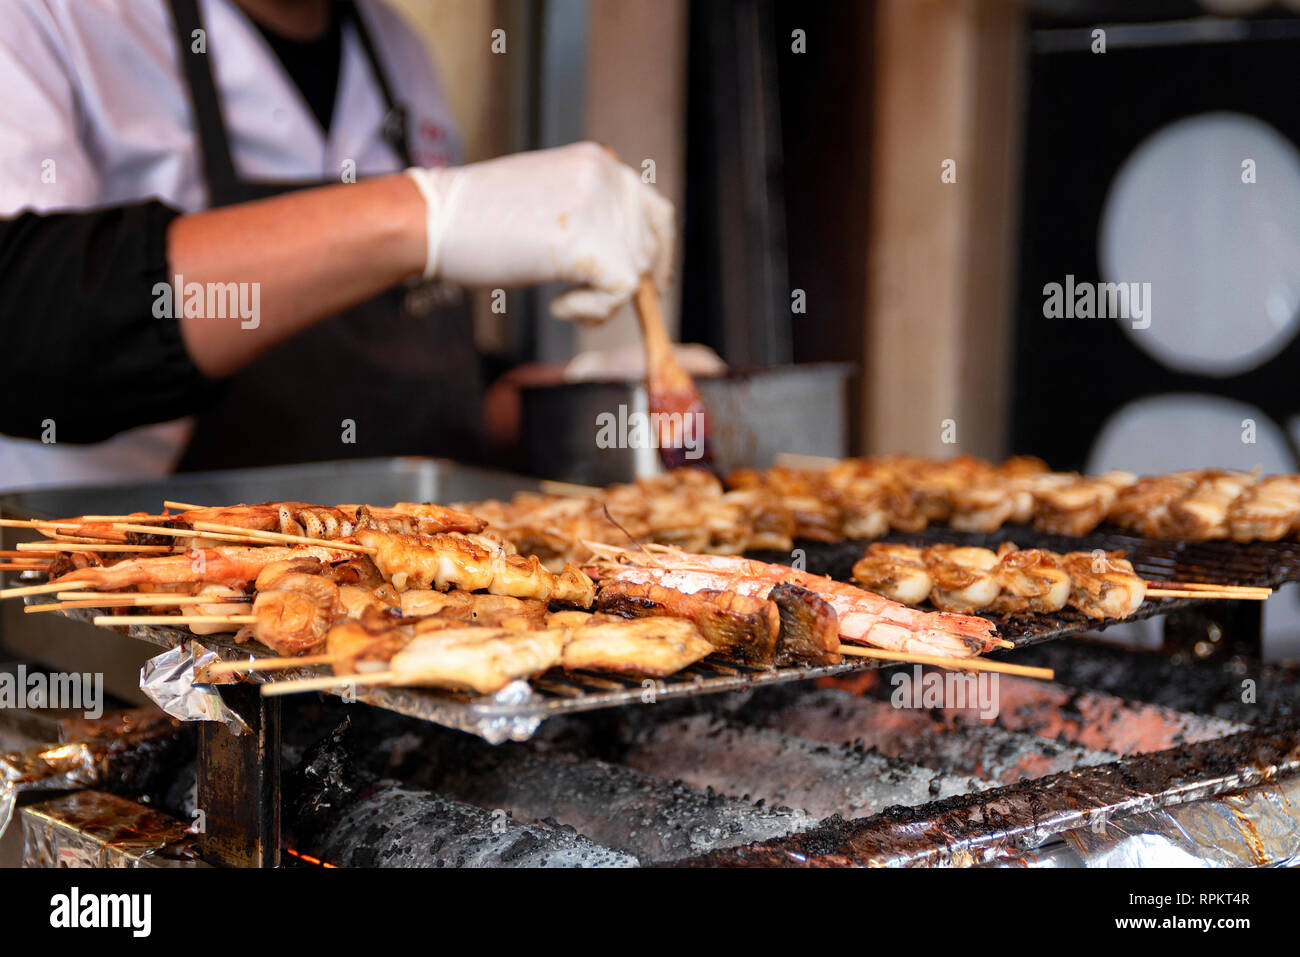 Street scene in Osaka, Japan, as chef bastes skewers of various meats for sale Stock Photo